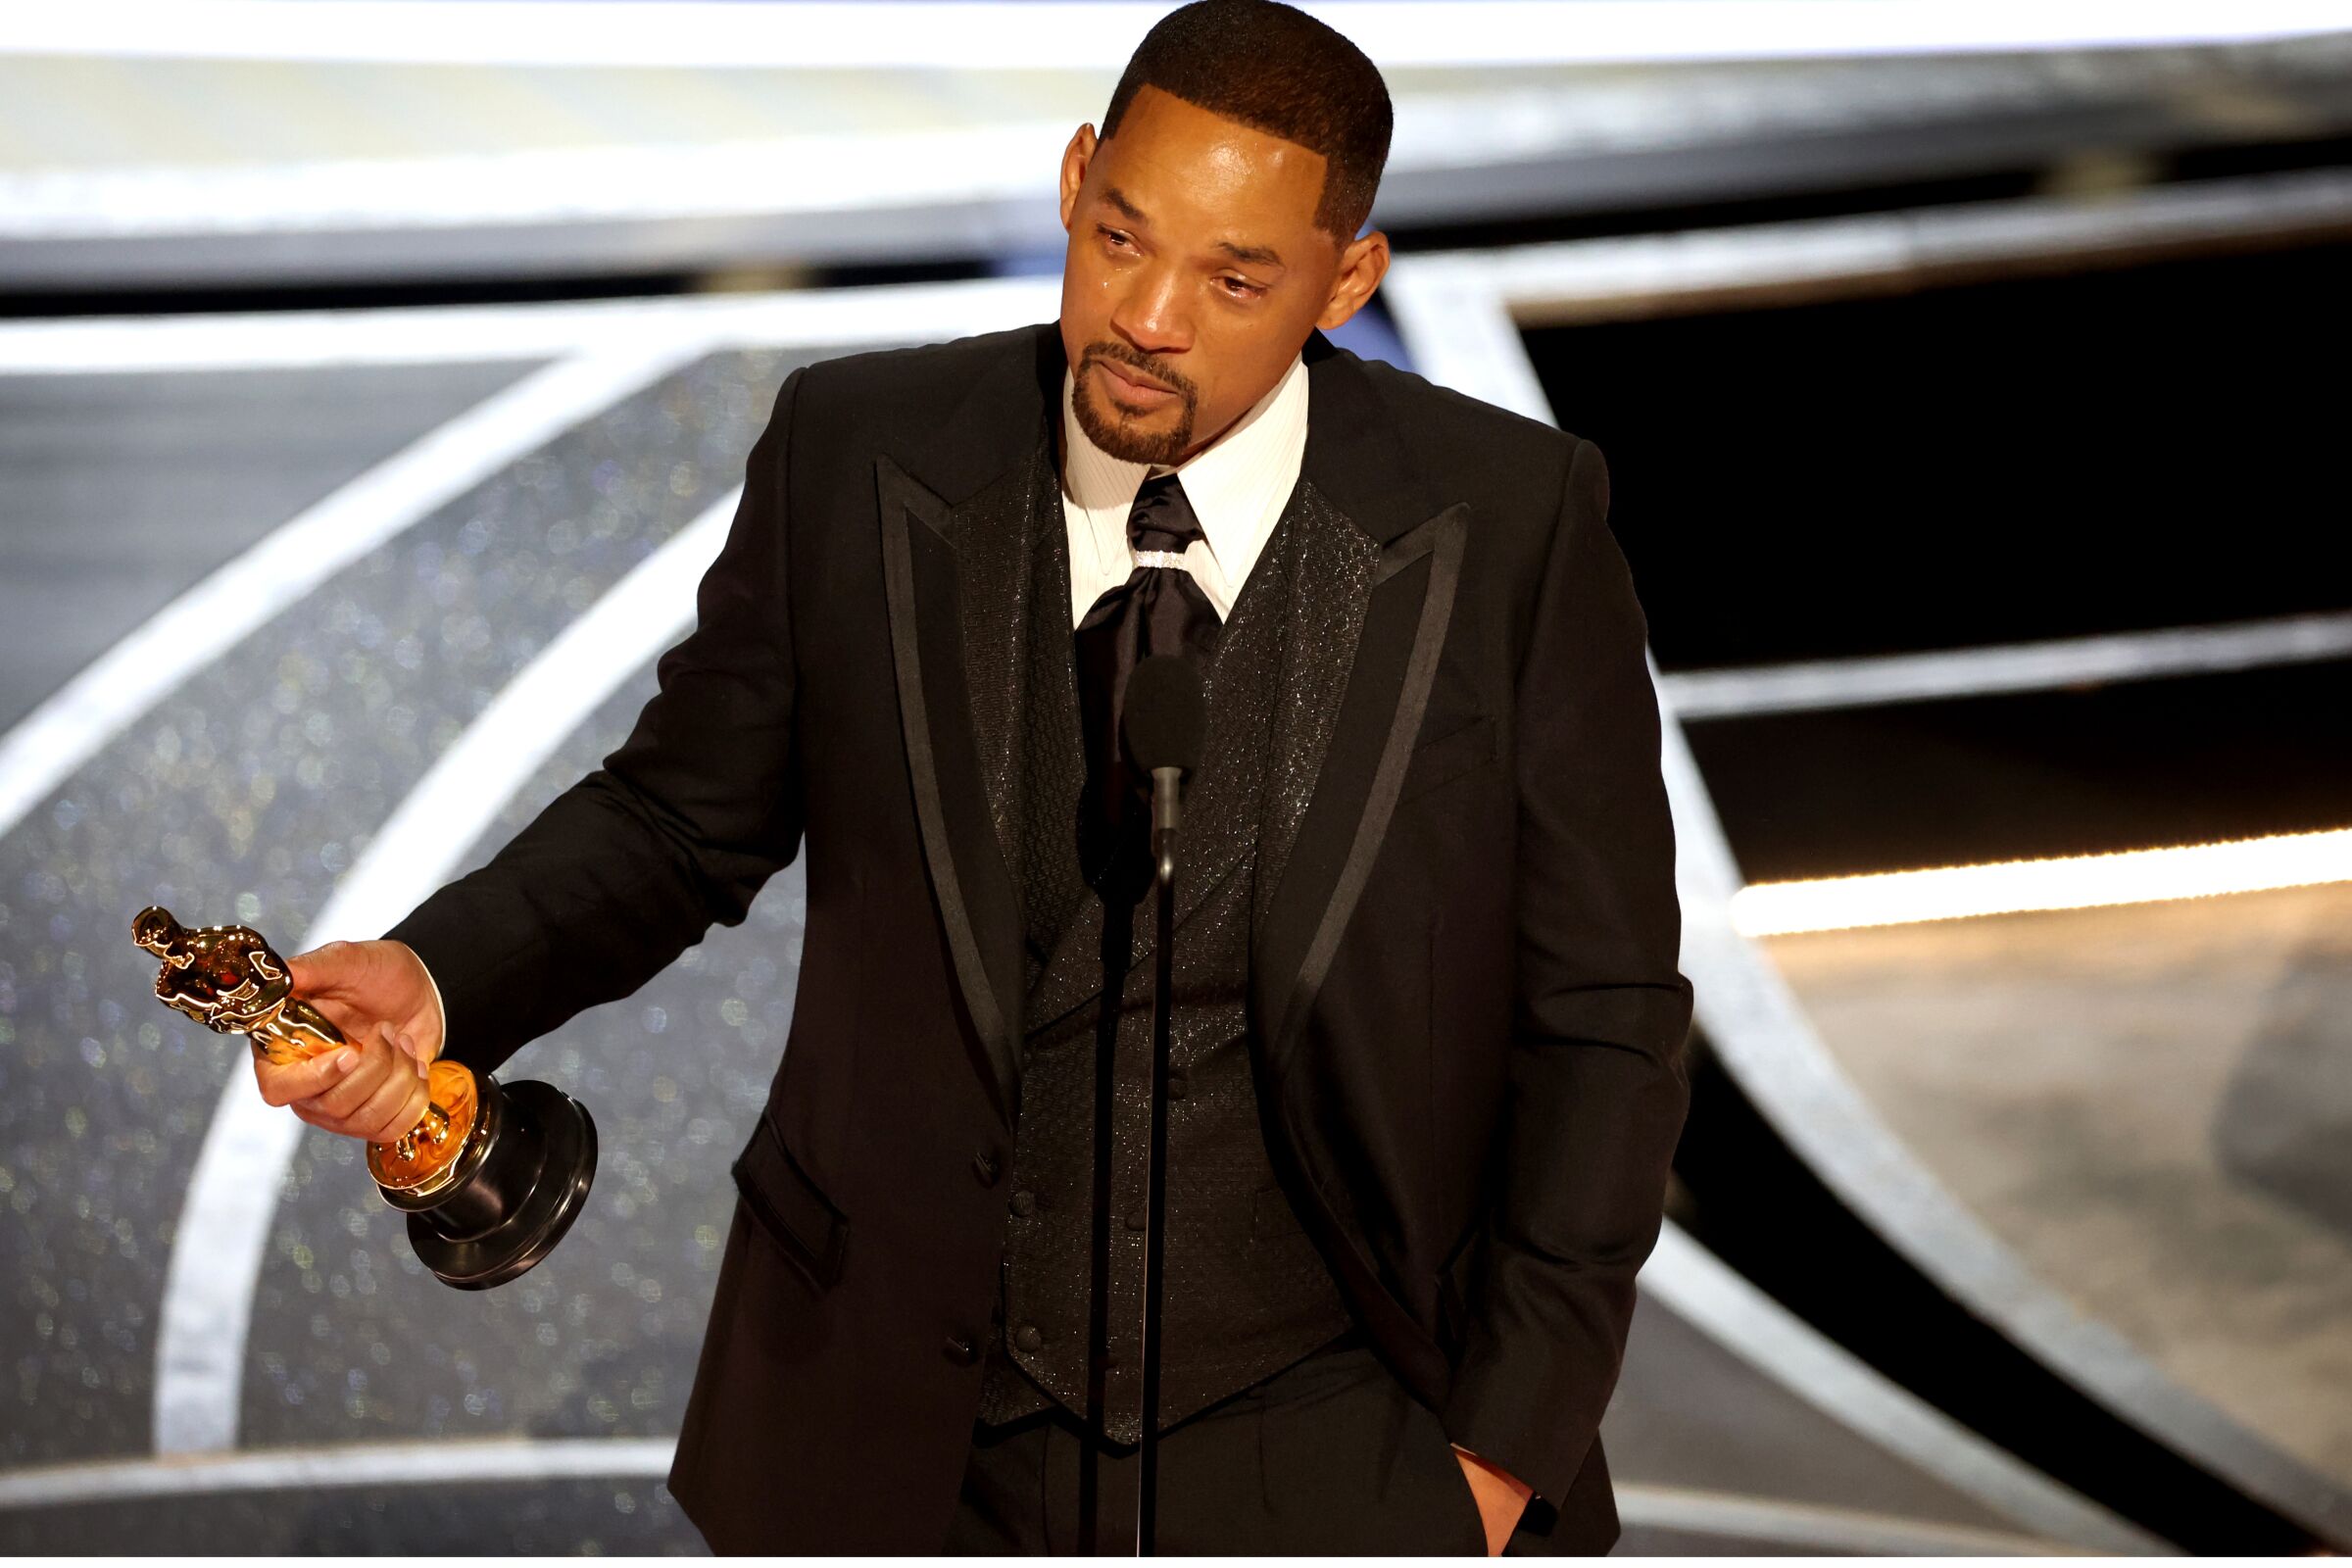  A man holds an Oscar and speaks at the Academy Awards ceremony.